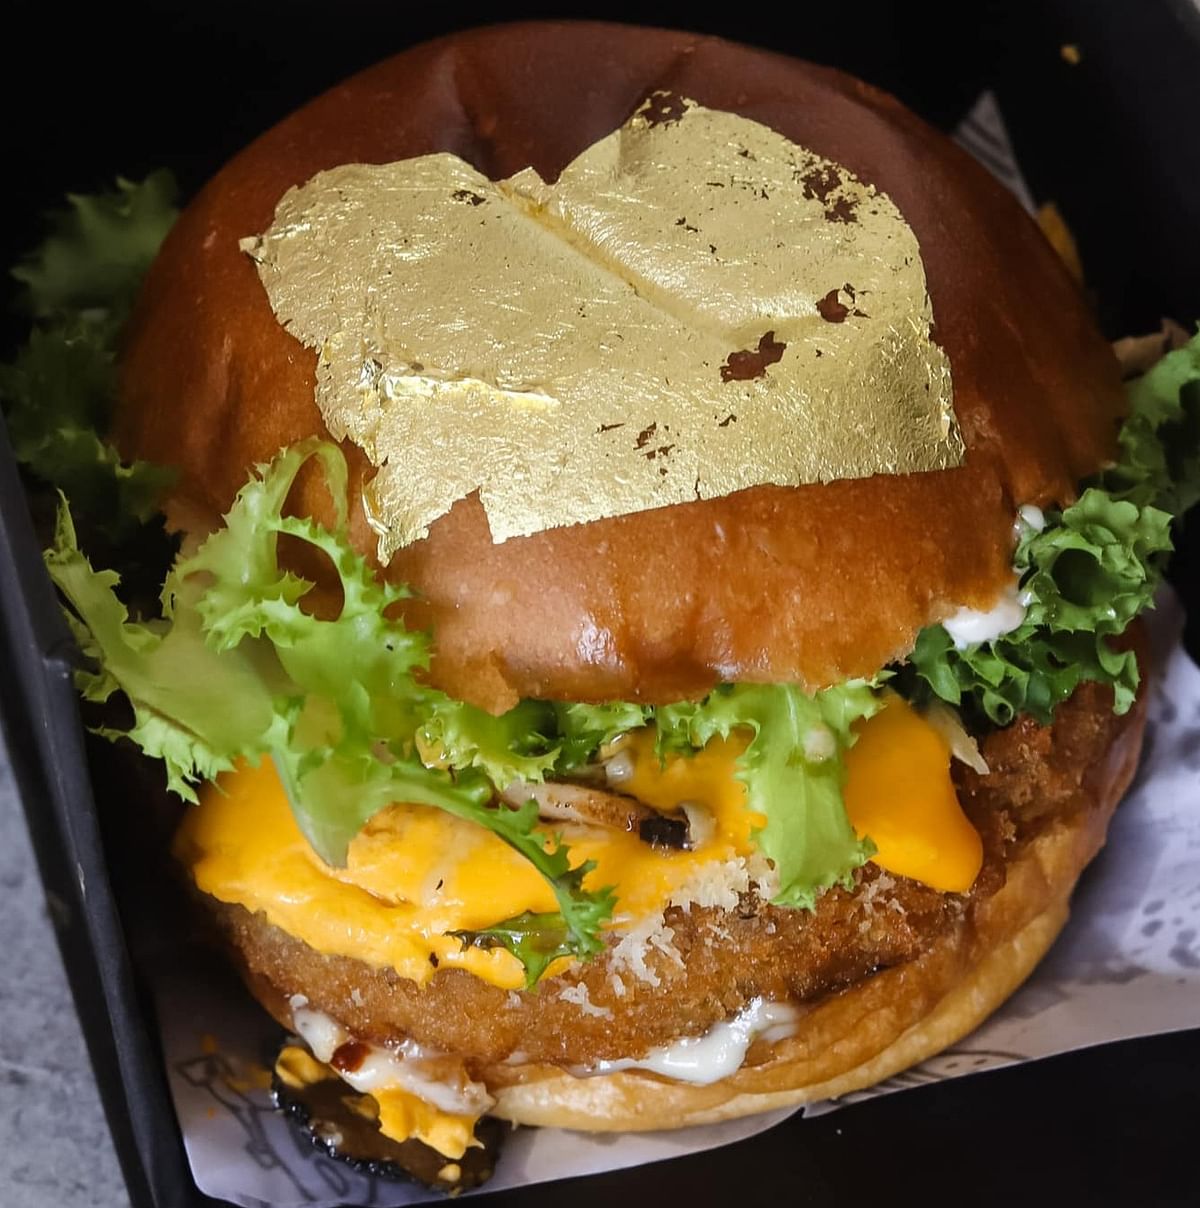 A burger topped with gold leaf from Louis Burger. Credit: Deepa Shri Rajan